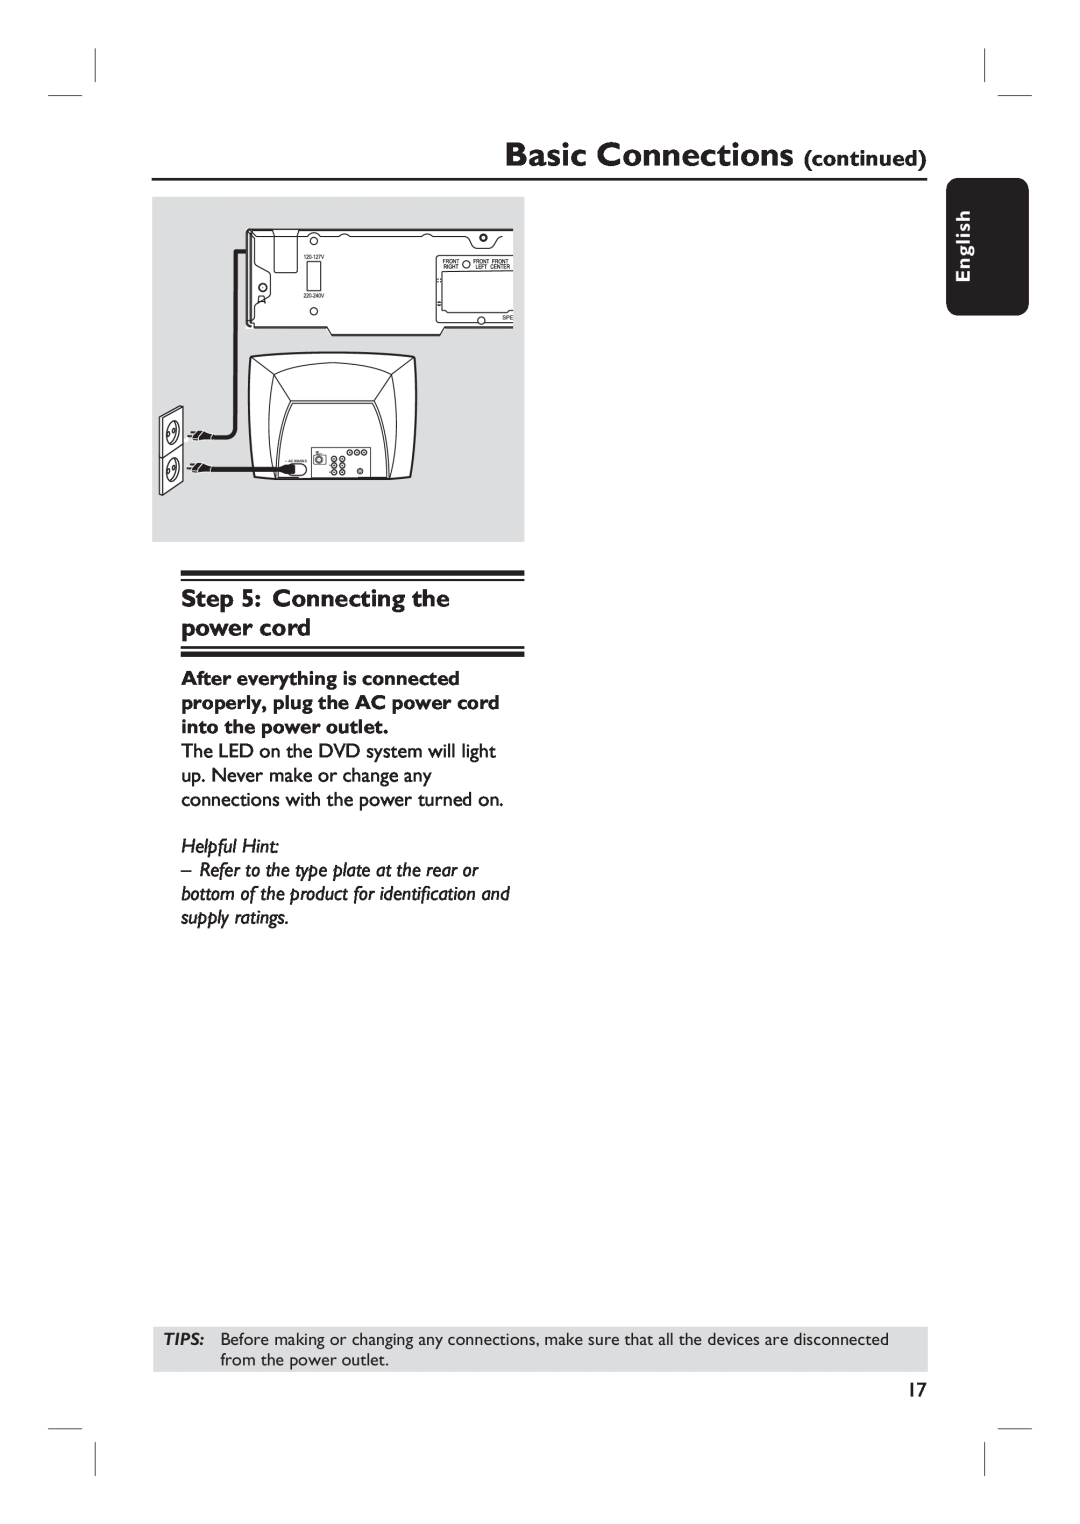 Magnavox MRD100 user manual Connecting the power cord, Basic Connections continued, English, Helpful Hint 